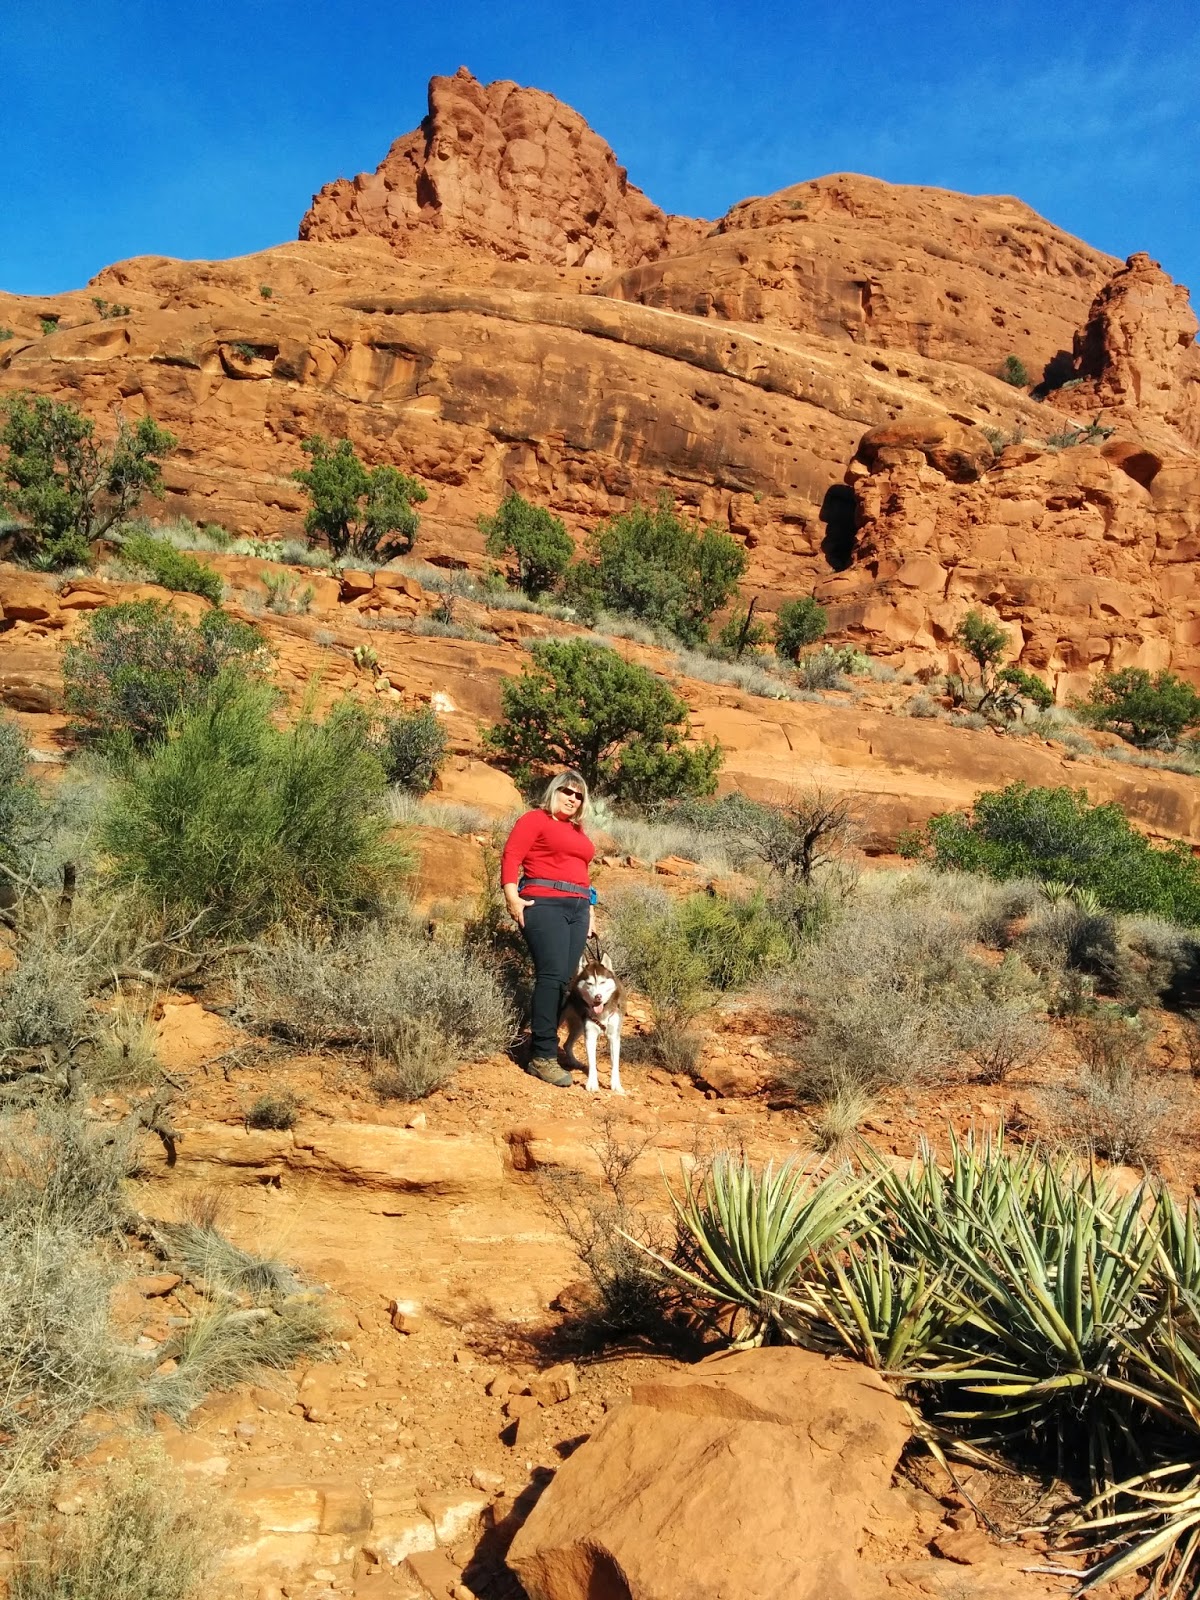 Dogs Luv Us and We Luv Them: 100 Places To See With Your Dog: Sedona in